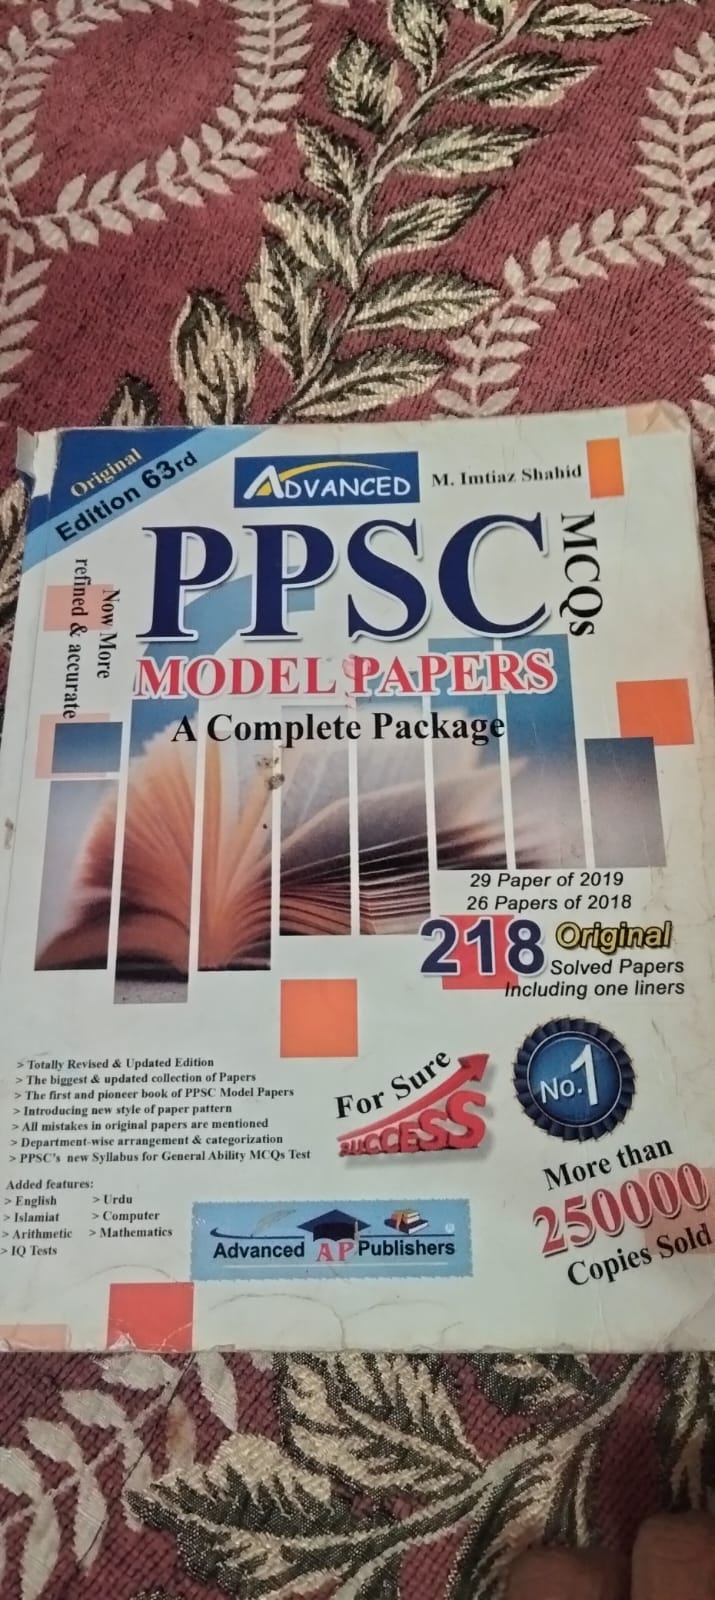 Ppsc preparation book by Imtiaz. Shahid, 63rdition